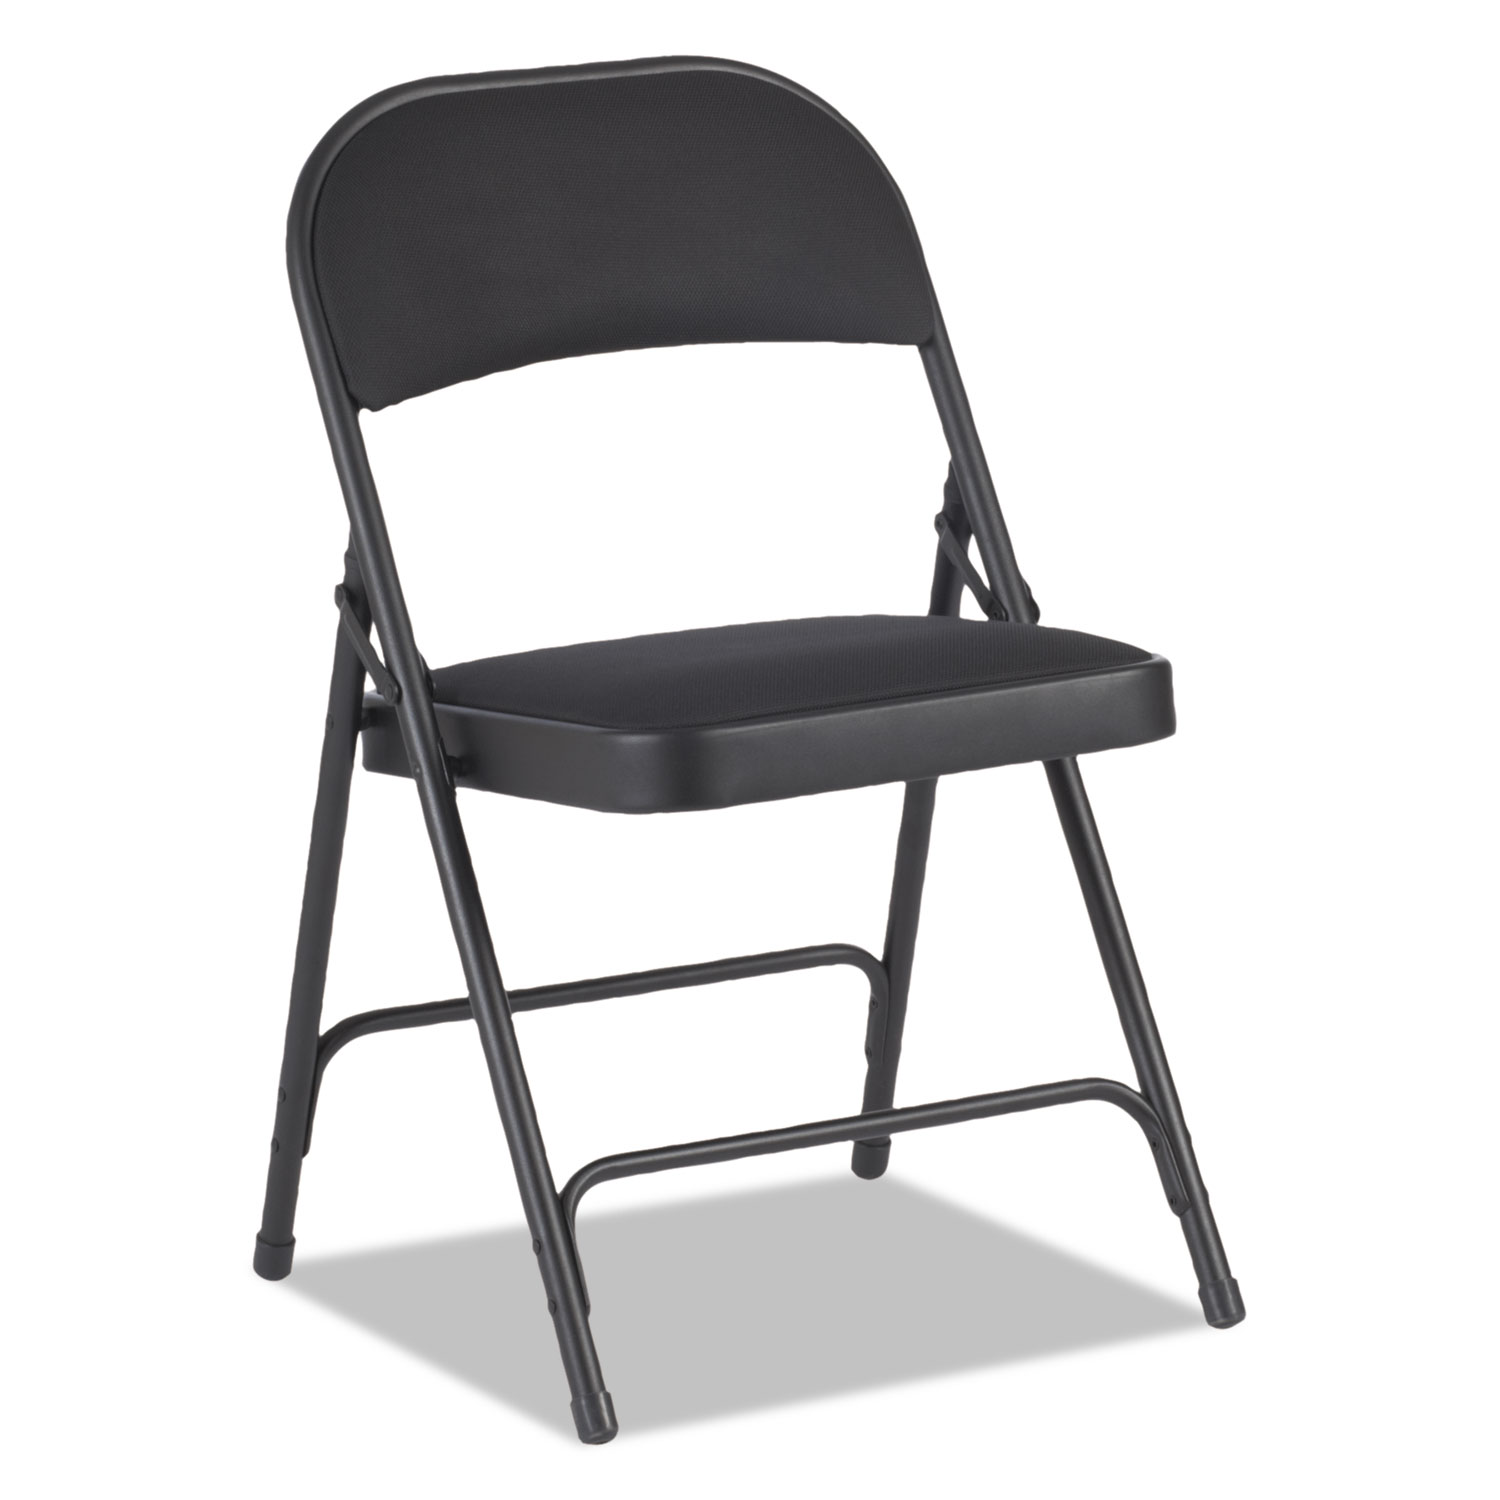 Steel Folding Chair with Two-Brace Support, Graphite Seat/Graphite Back, Graphite Base, 4/Carton